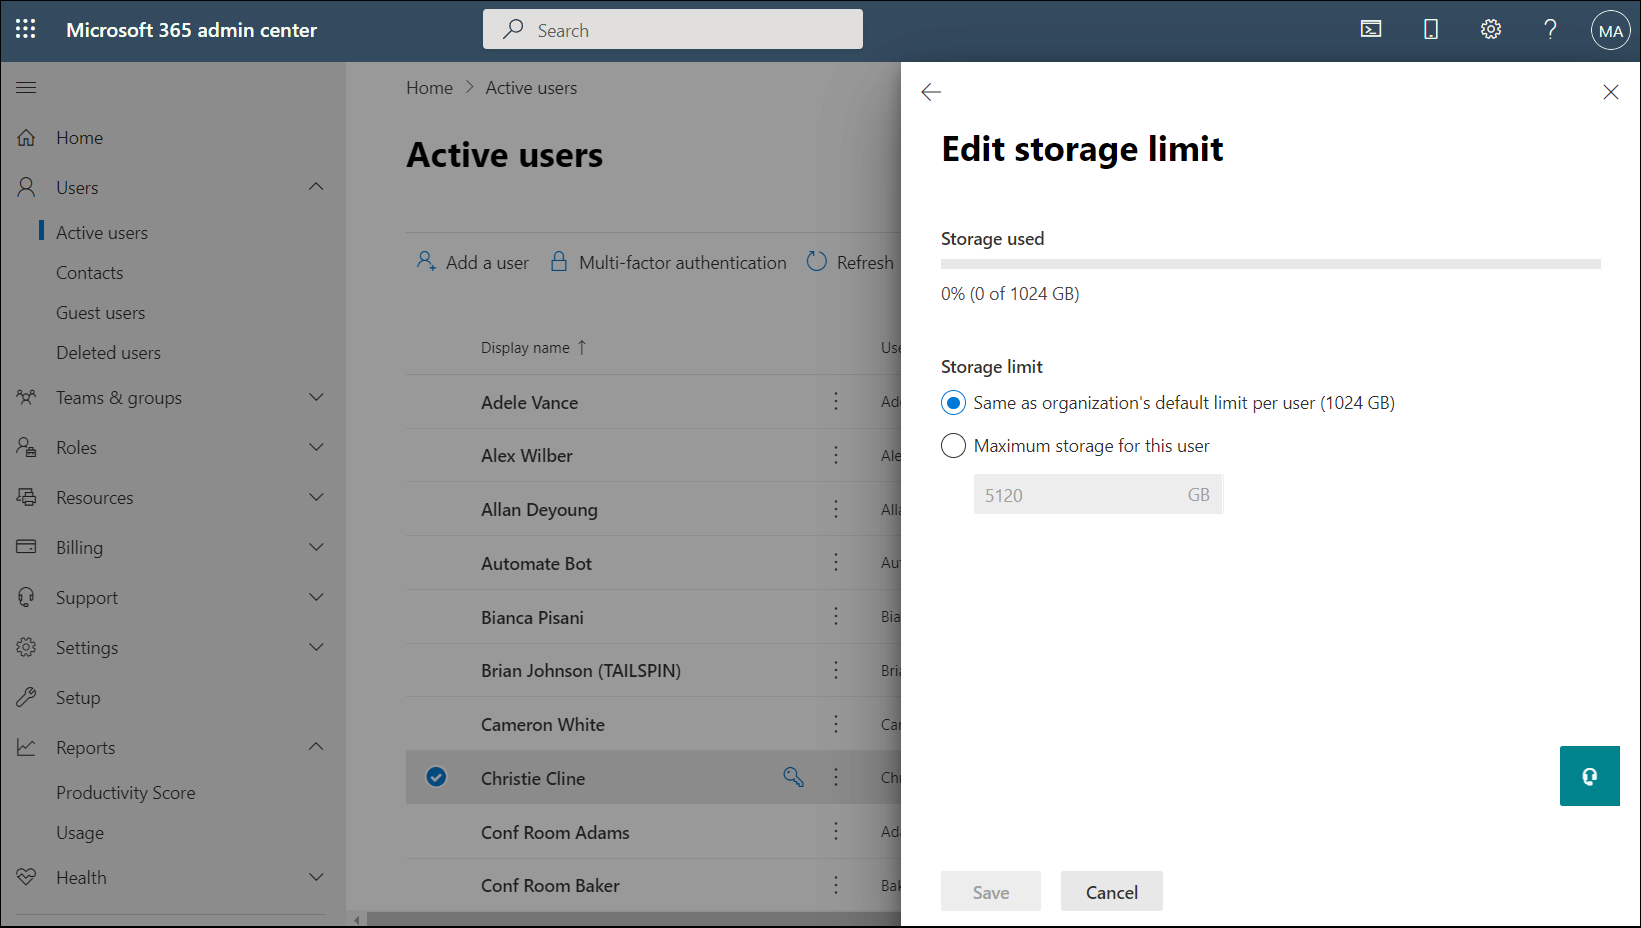 Screenshot of the edit storage limit options in Microsoft 365 admin center.